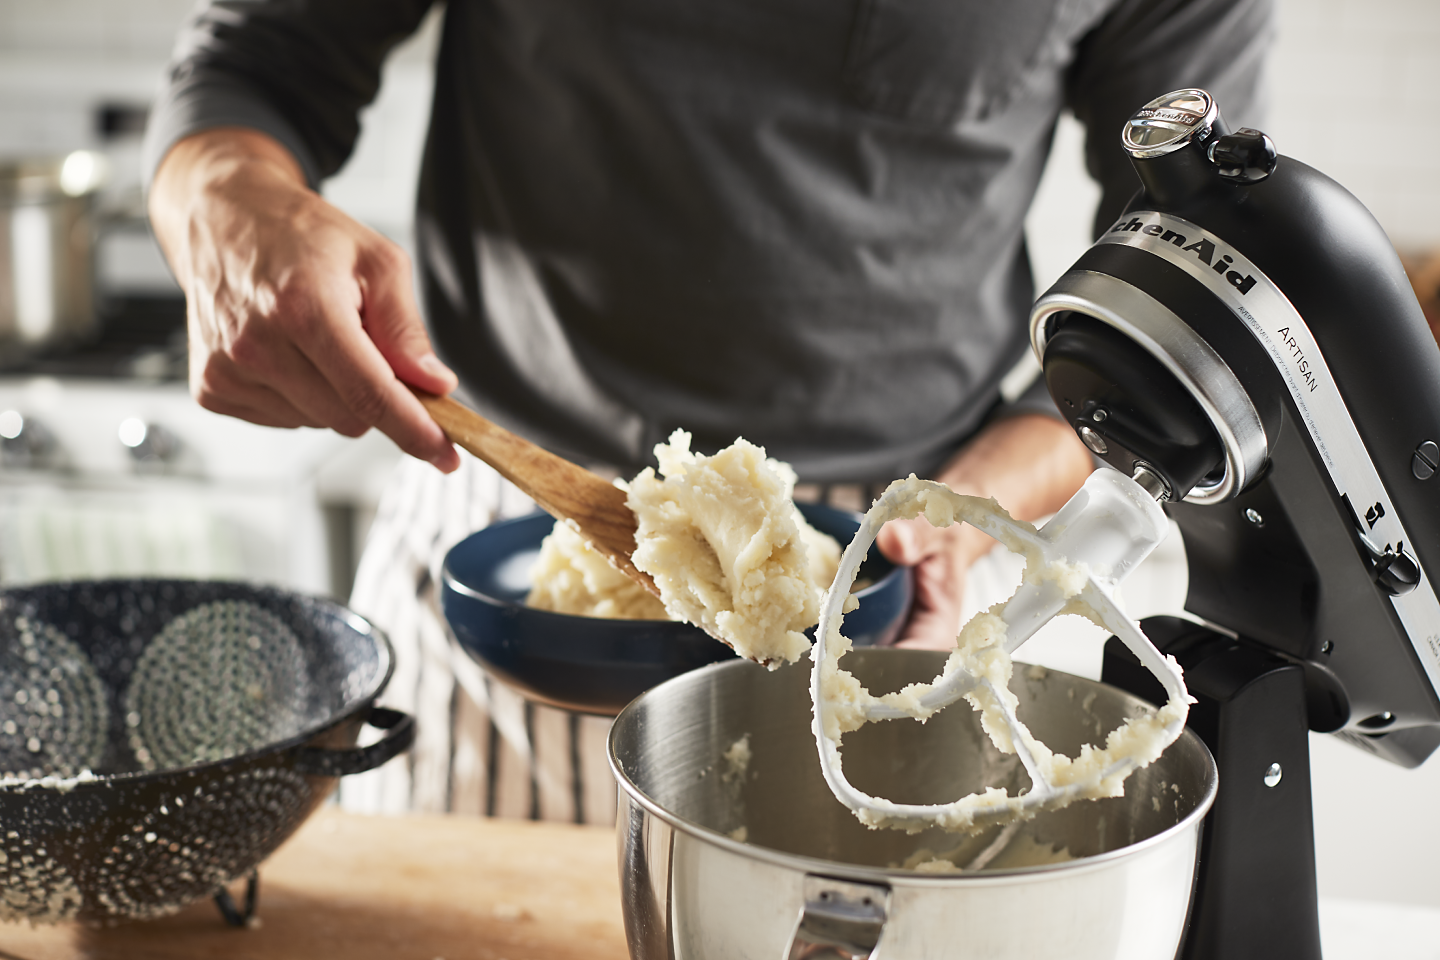 https://kitchenaid-h.assetsadobe.com/is/image/content/dam/business-unit/kitchenaid/en-us/marketing-content/site-assets/page-content/pinch-of-help/how-to-make-mashed-potatoes-with-a-stand-mixer/Mashed-Potato-Stand-Mixer_4.png?fmt=png-alpha&qlt=85,0&resMode=sharp2&op_usm=1.75,0.3,2,0&scl=1&constrain=fit,1